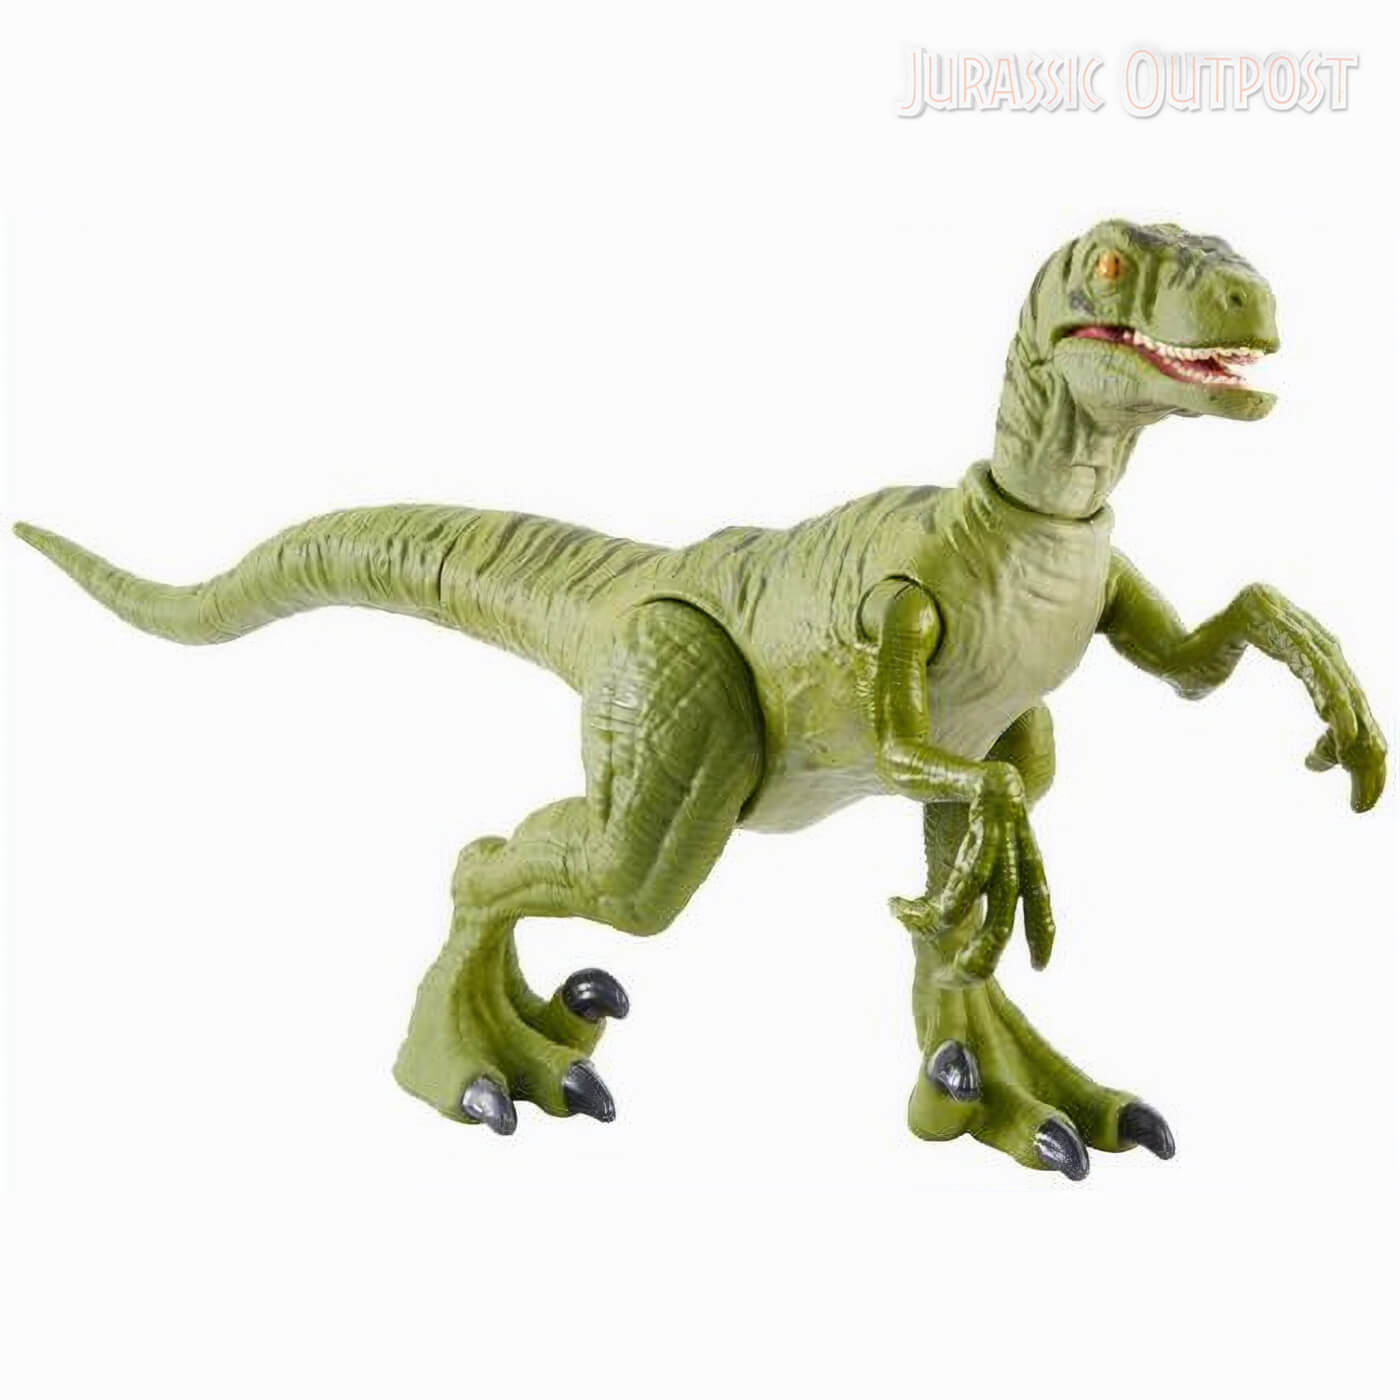 Jurassic World Dino Rivals Ornitholestes Action Figure Offical Licenced Toy